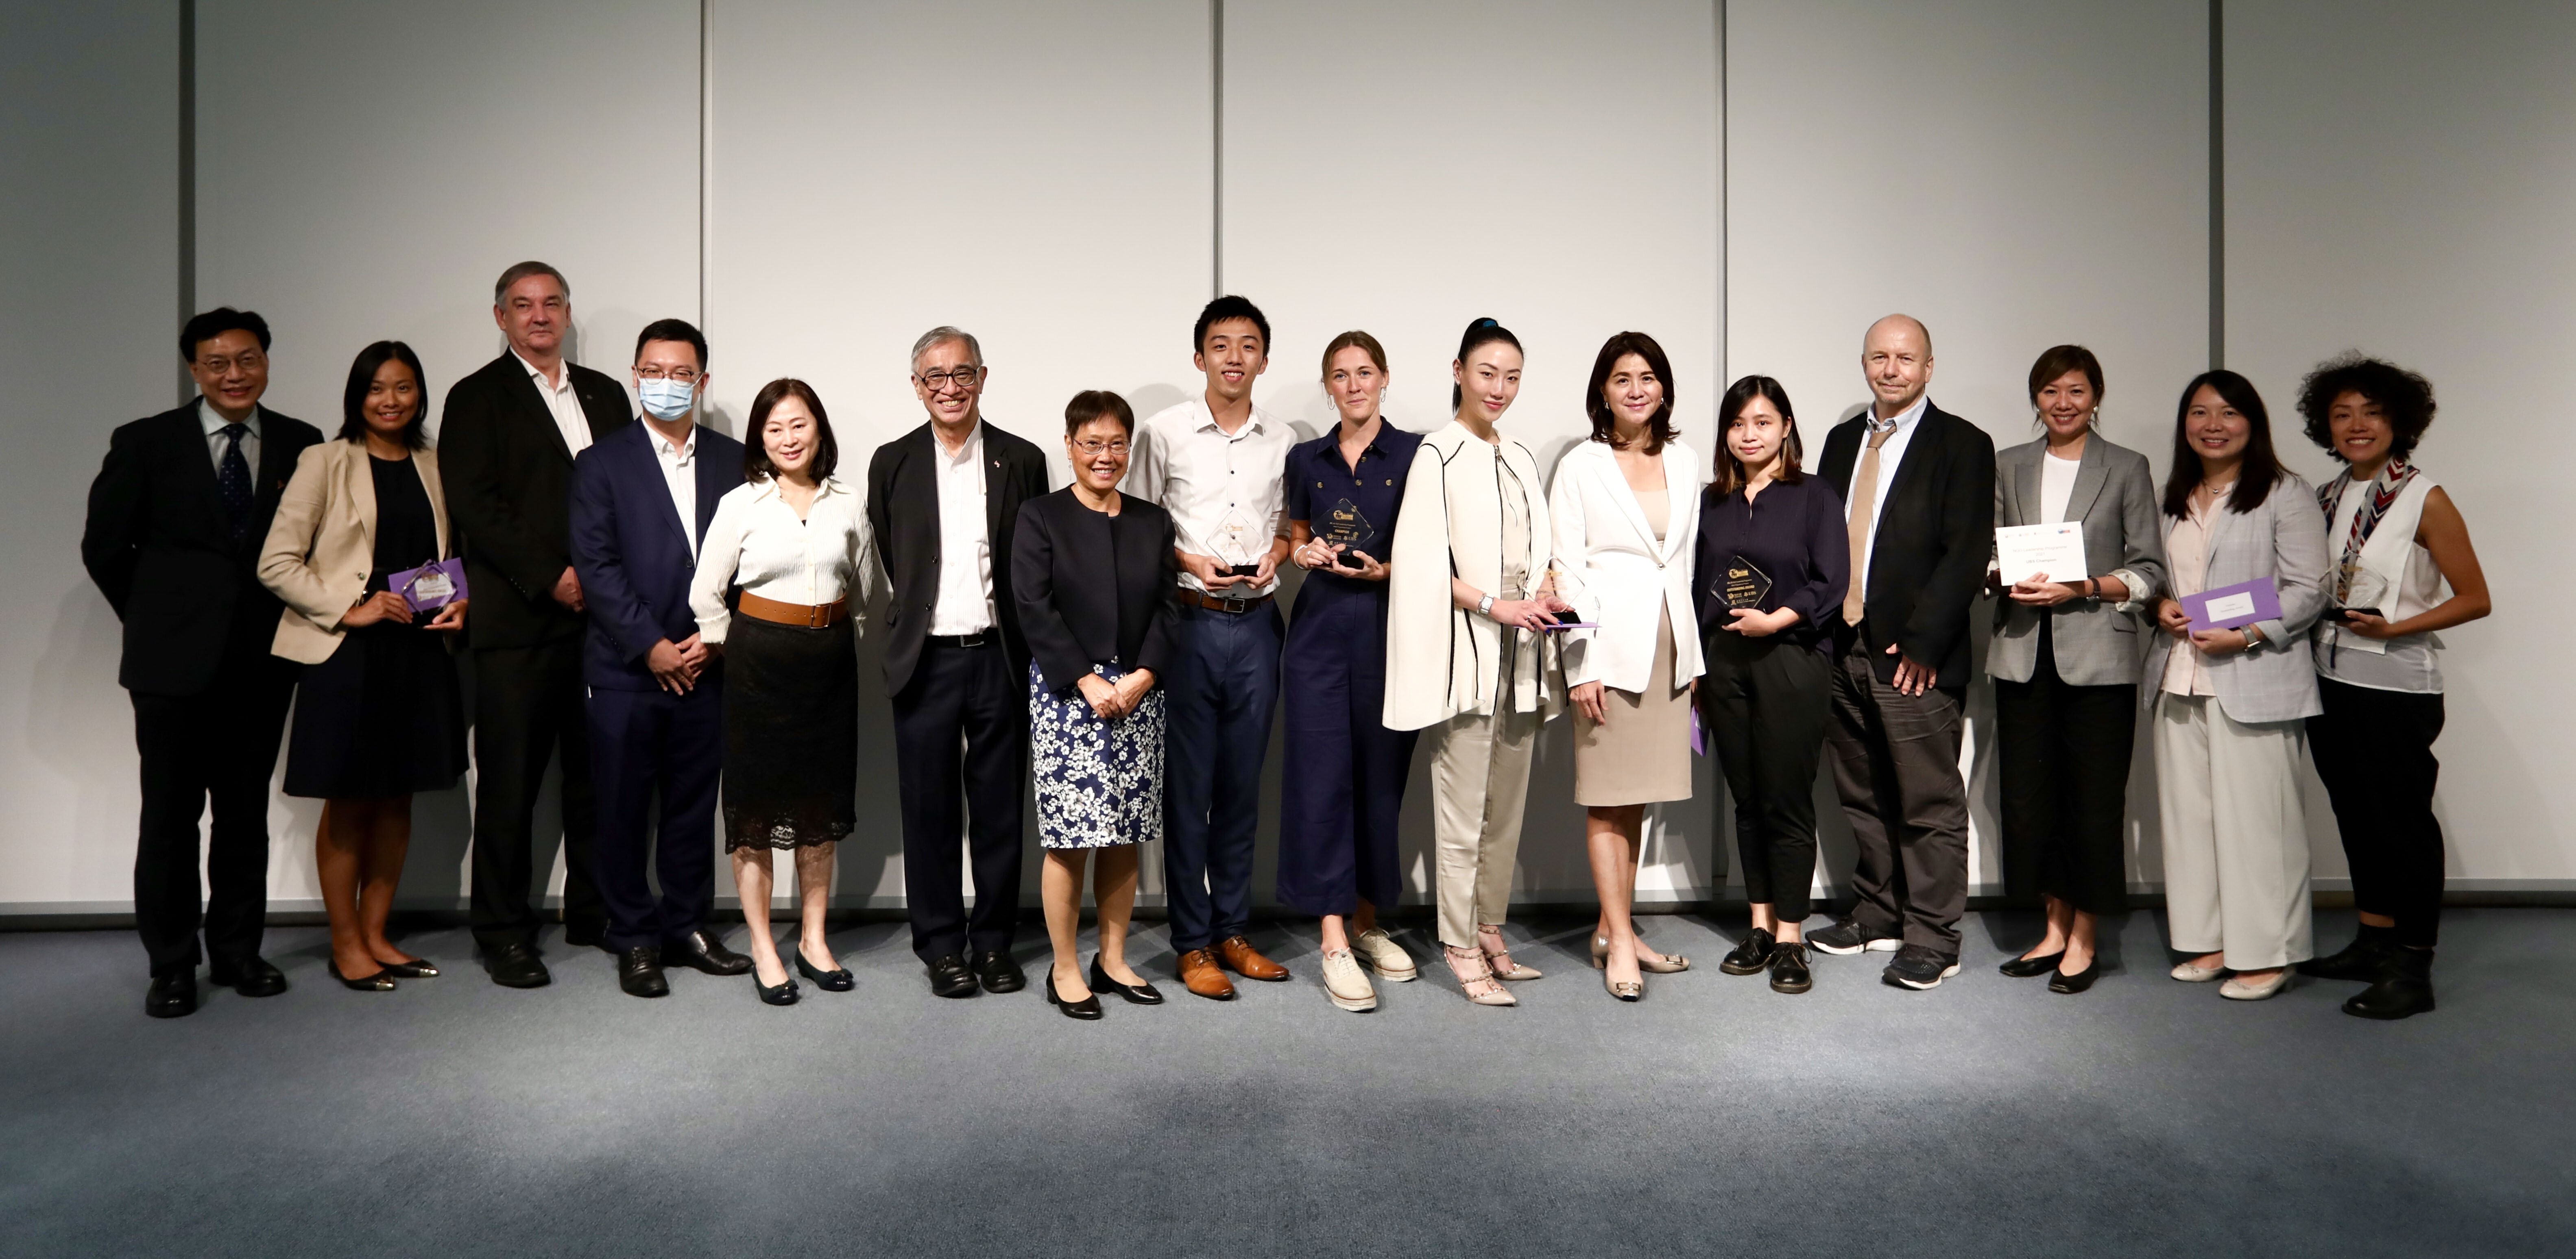 (Left to right) Rob Stewart, UBS head of corporate communications APAC; Ho Kai-ming, undersecretary for labour and welfare; Tammy Tam, SCMP editor-in-chief; Joseph Lee, Wofoo Foundation; Joyce Ma, CUHK’s social work department; Henry Lee, of Teach for Hong Kong; Charlotte Tottenham, from ImpactHK; Nancy Wong, of Karen Leung Foundation; Amy Lo, UBS Hong Kong head and CEO. Photo: Jonathan Wong